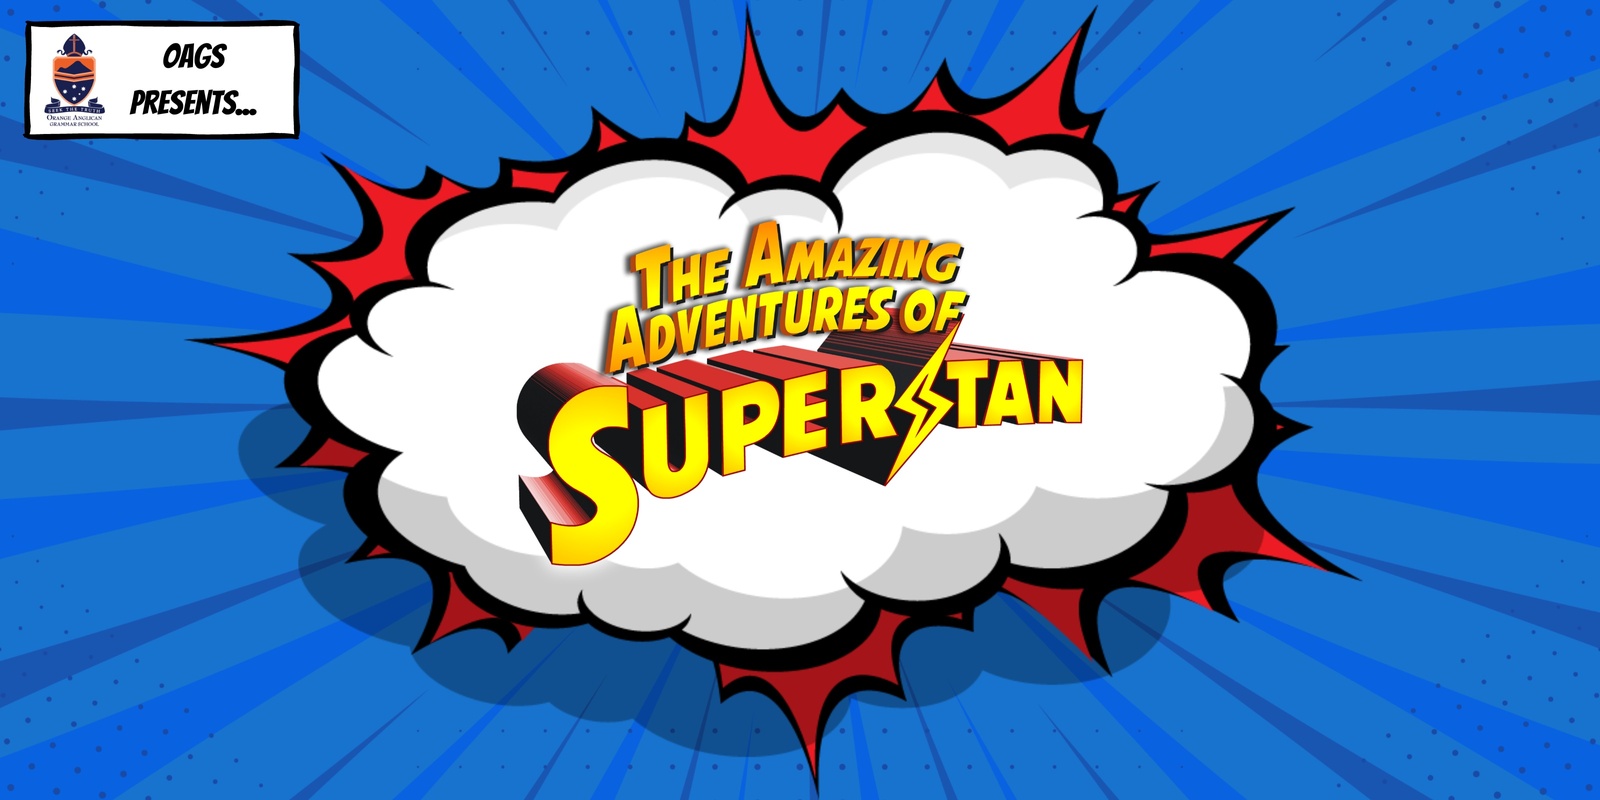 Banner image for OAGS Primary Show The Amazing Adventures of Superstan